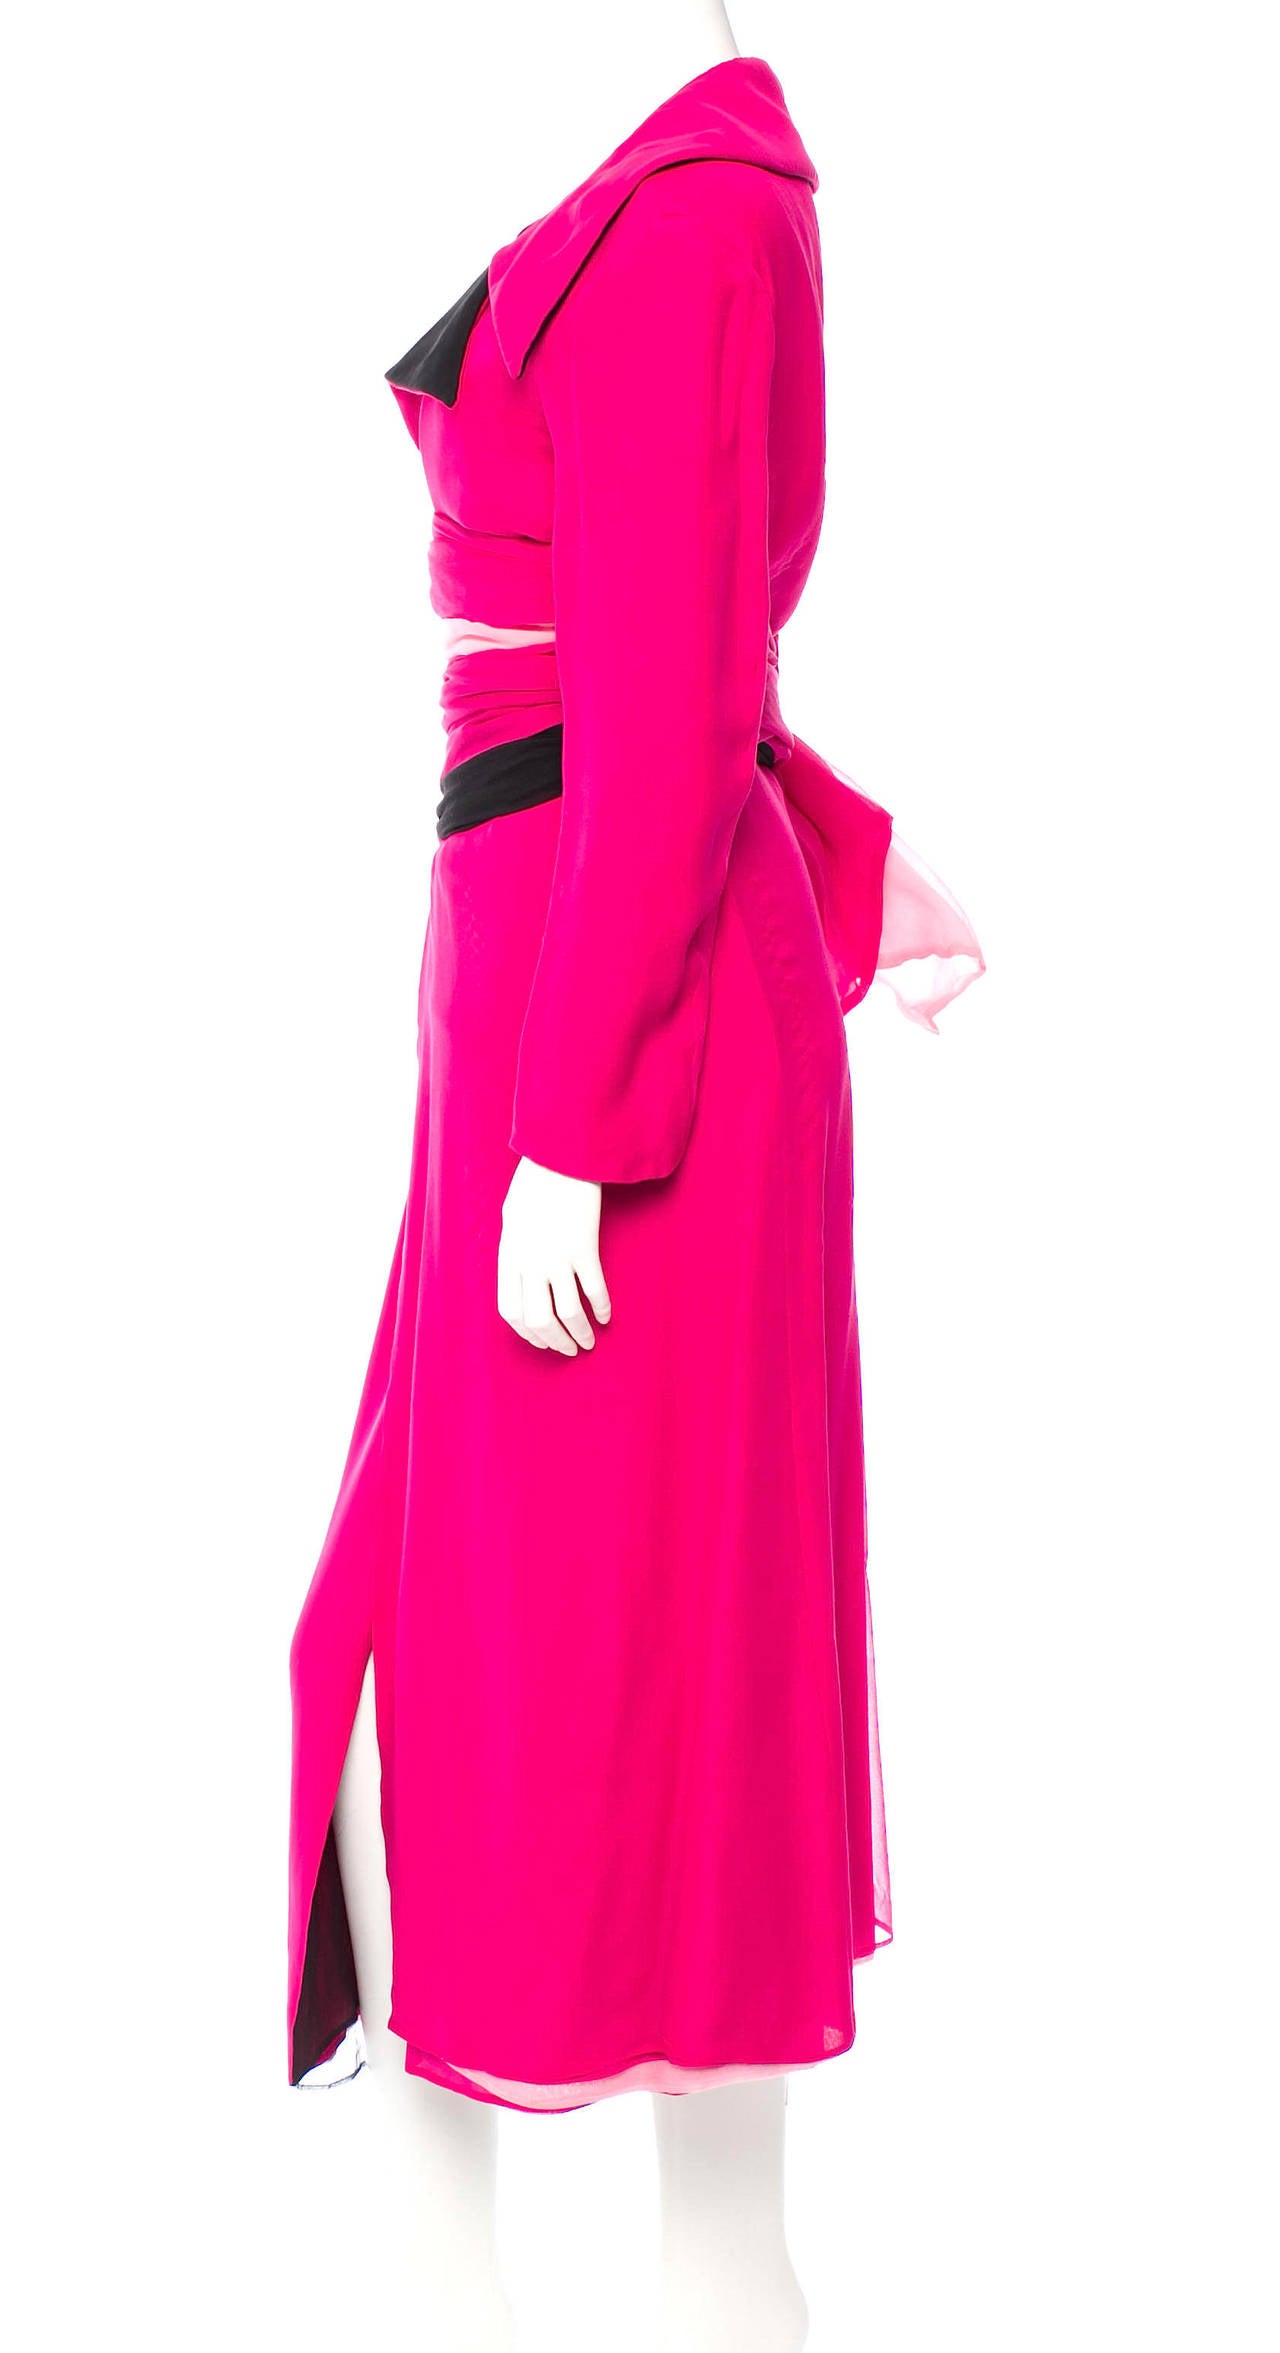 Yohji Yamamoto Fuchsia Silk Coat Dress with waist sash In Excellent Condition For Sale In Bethesda, MD